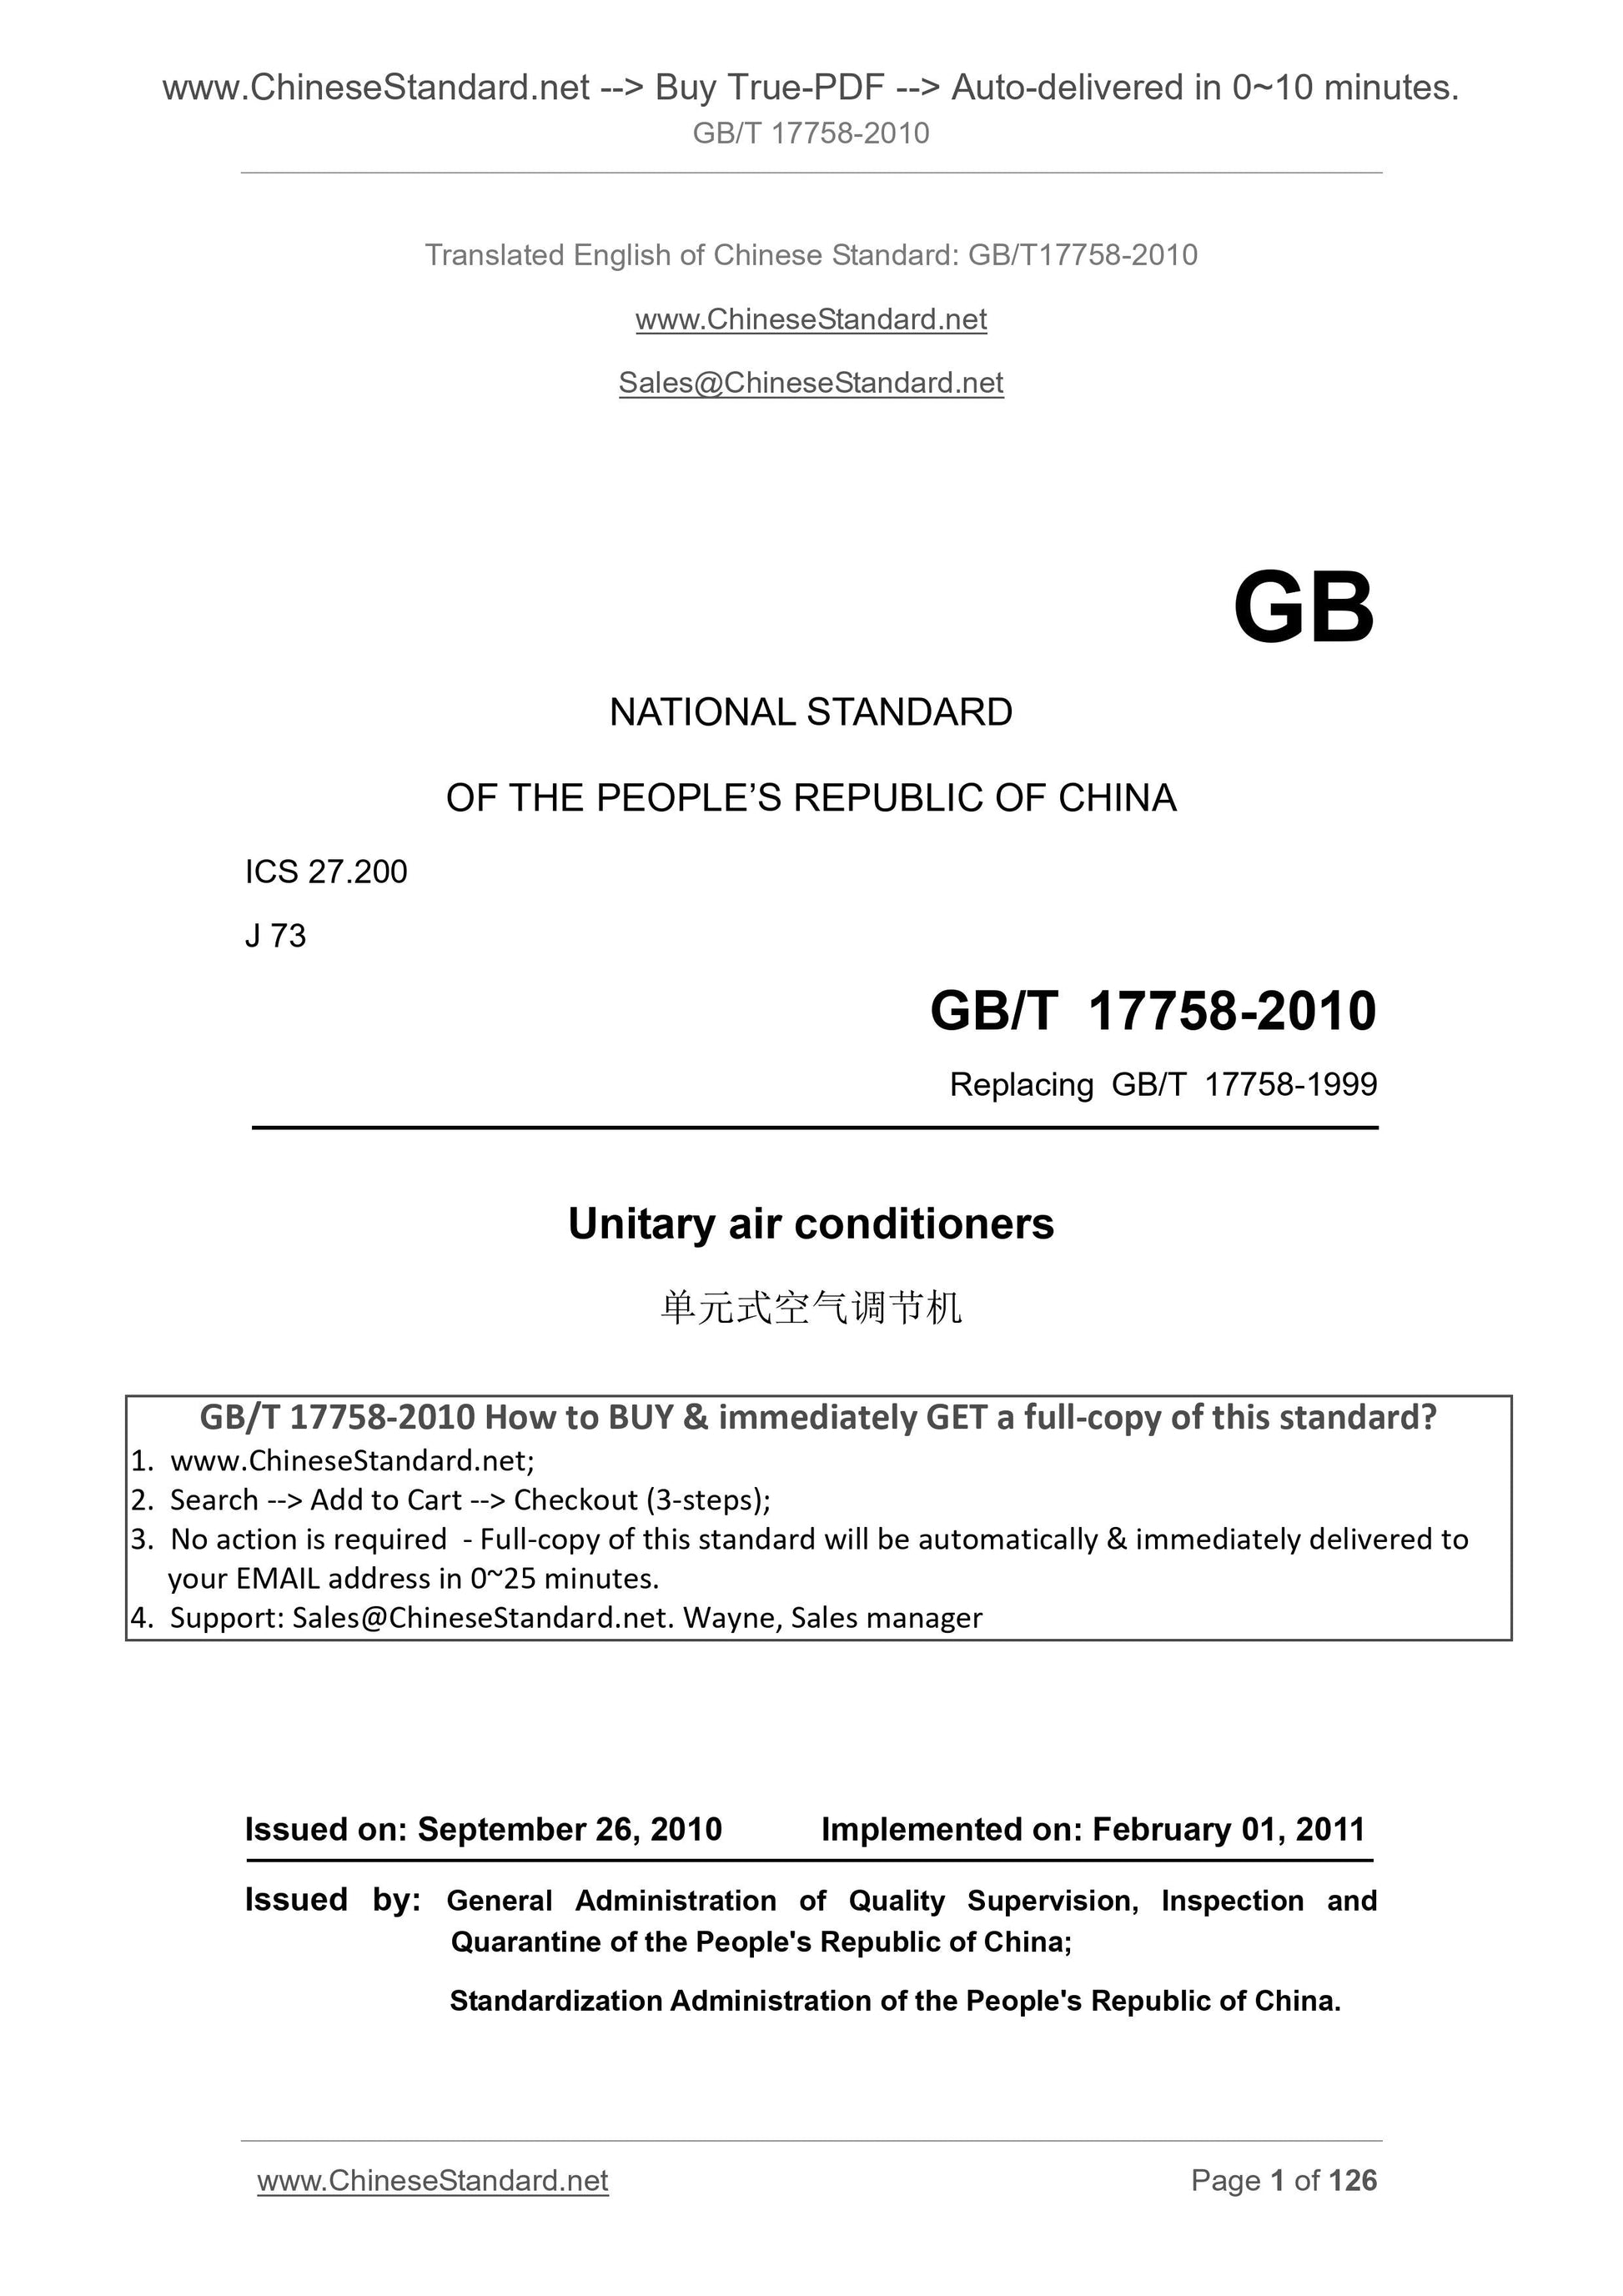 GB/T 17758-2010 Page 1